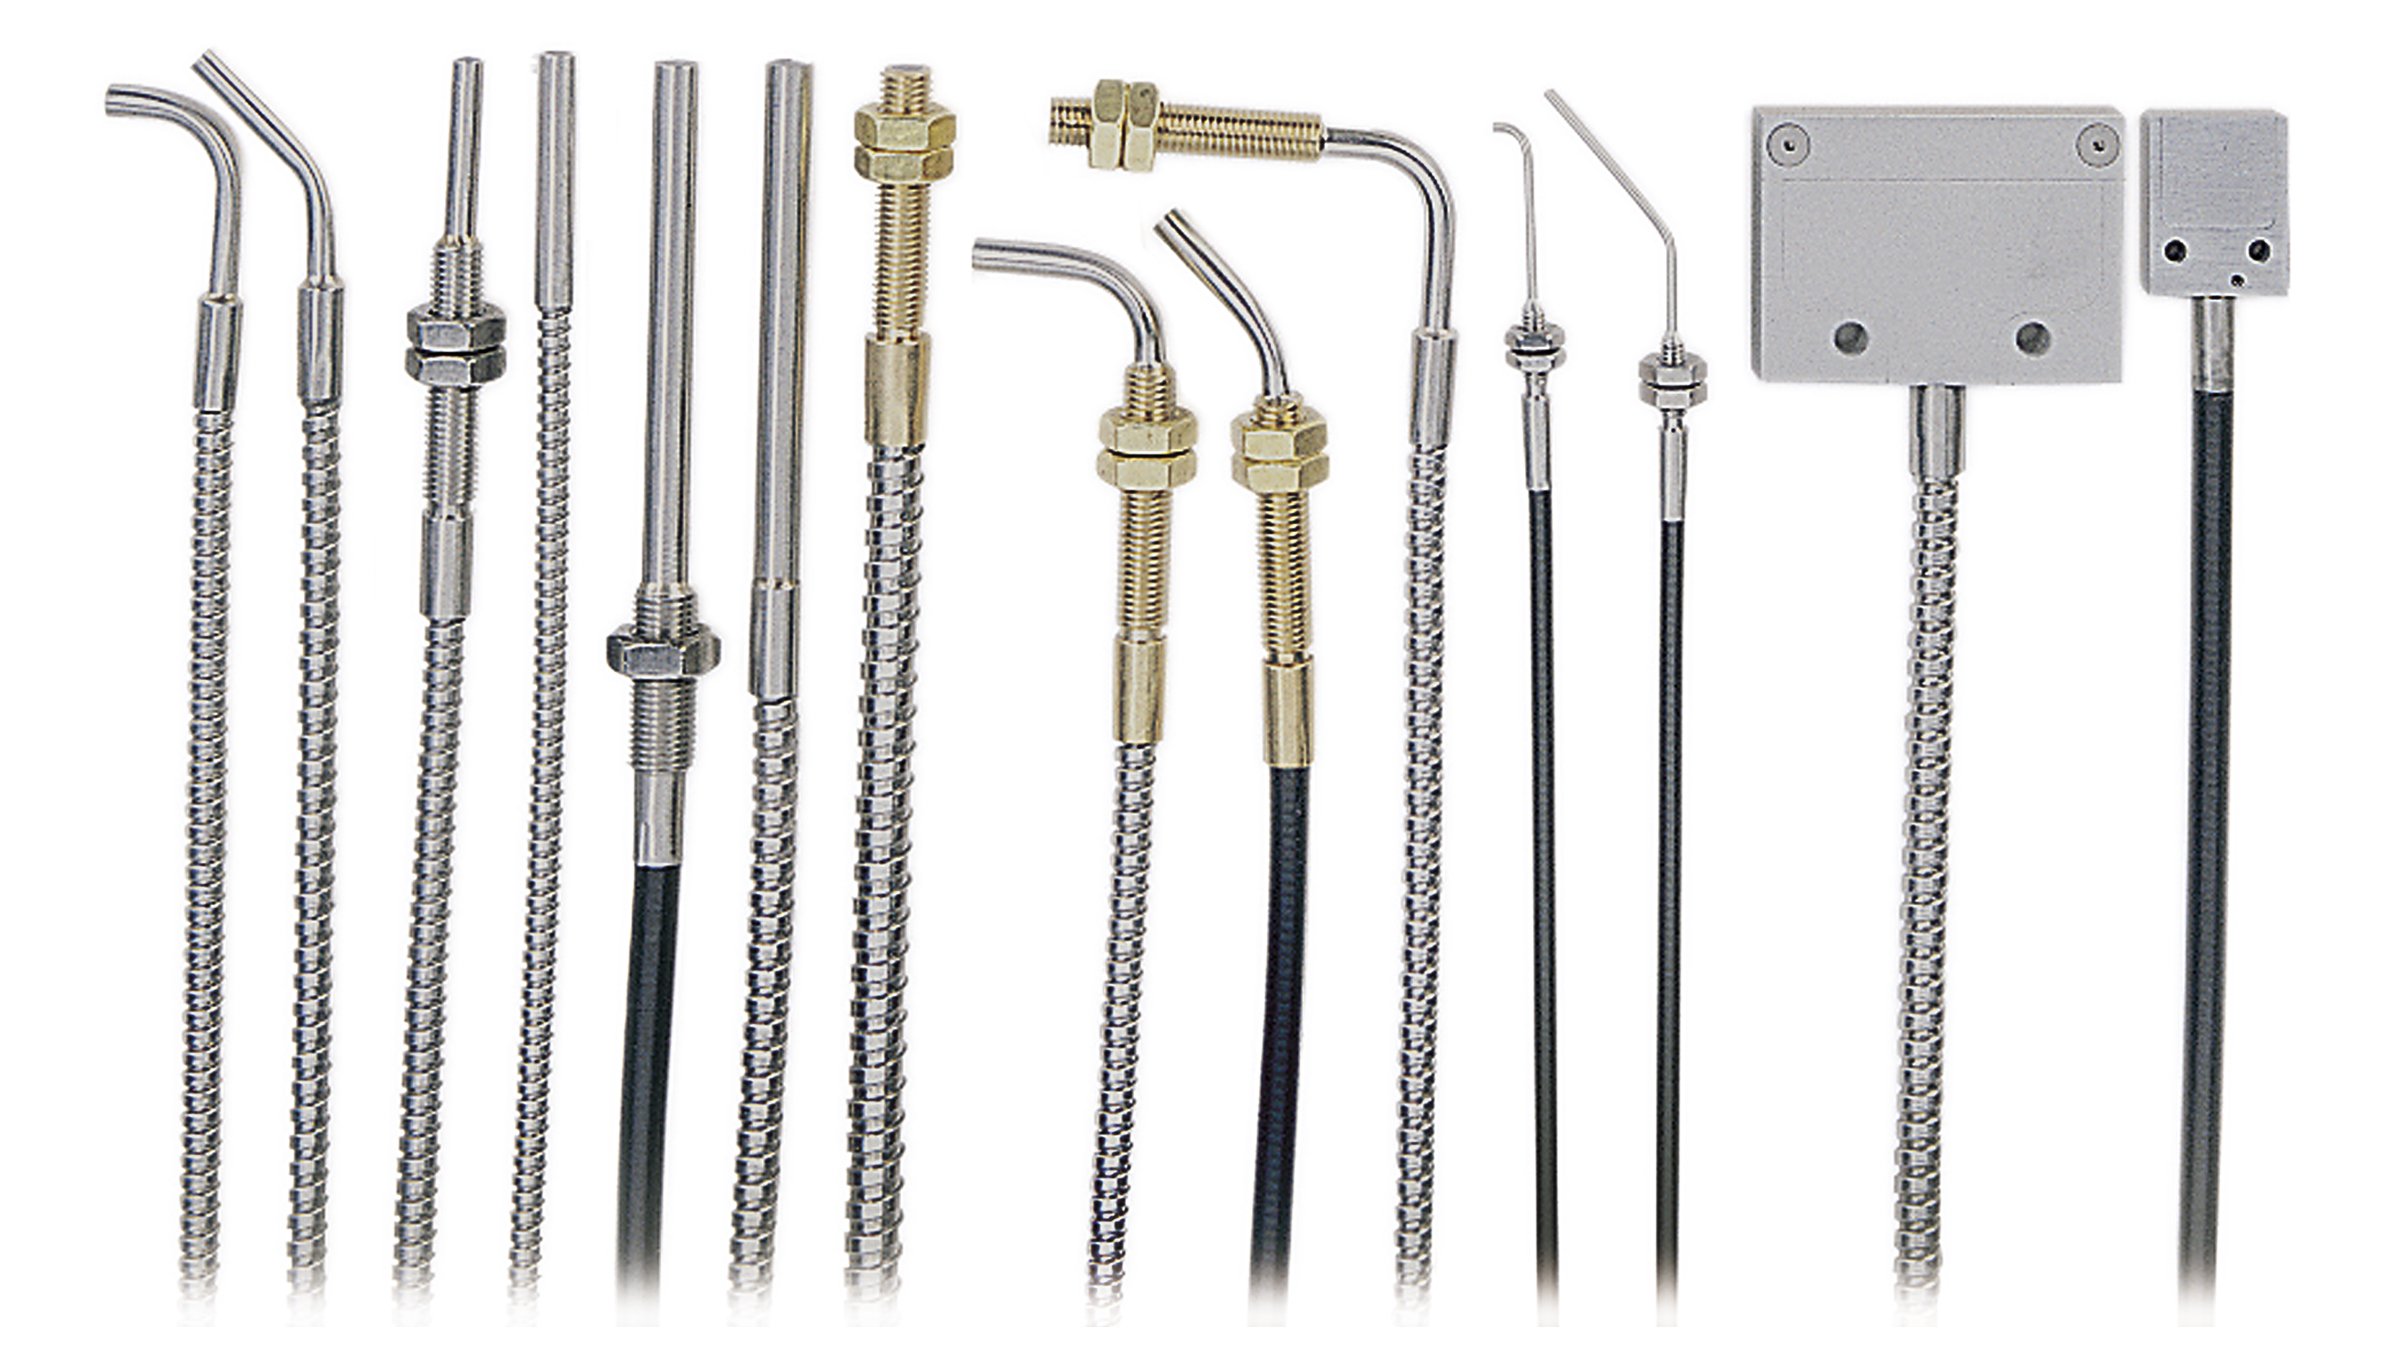 14 thin stainless-steel sensors of various shapes with integrated cables